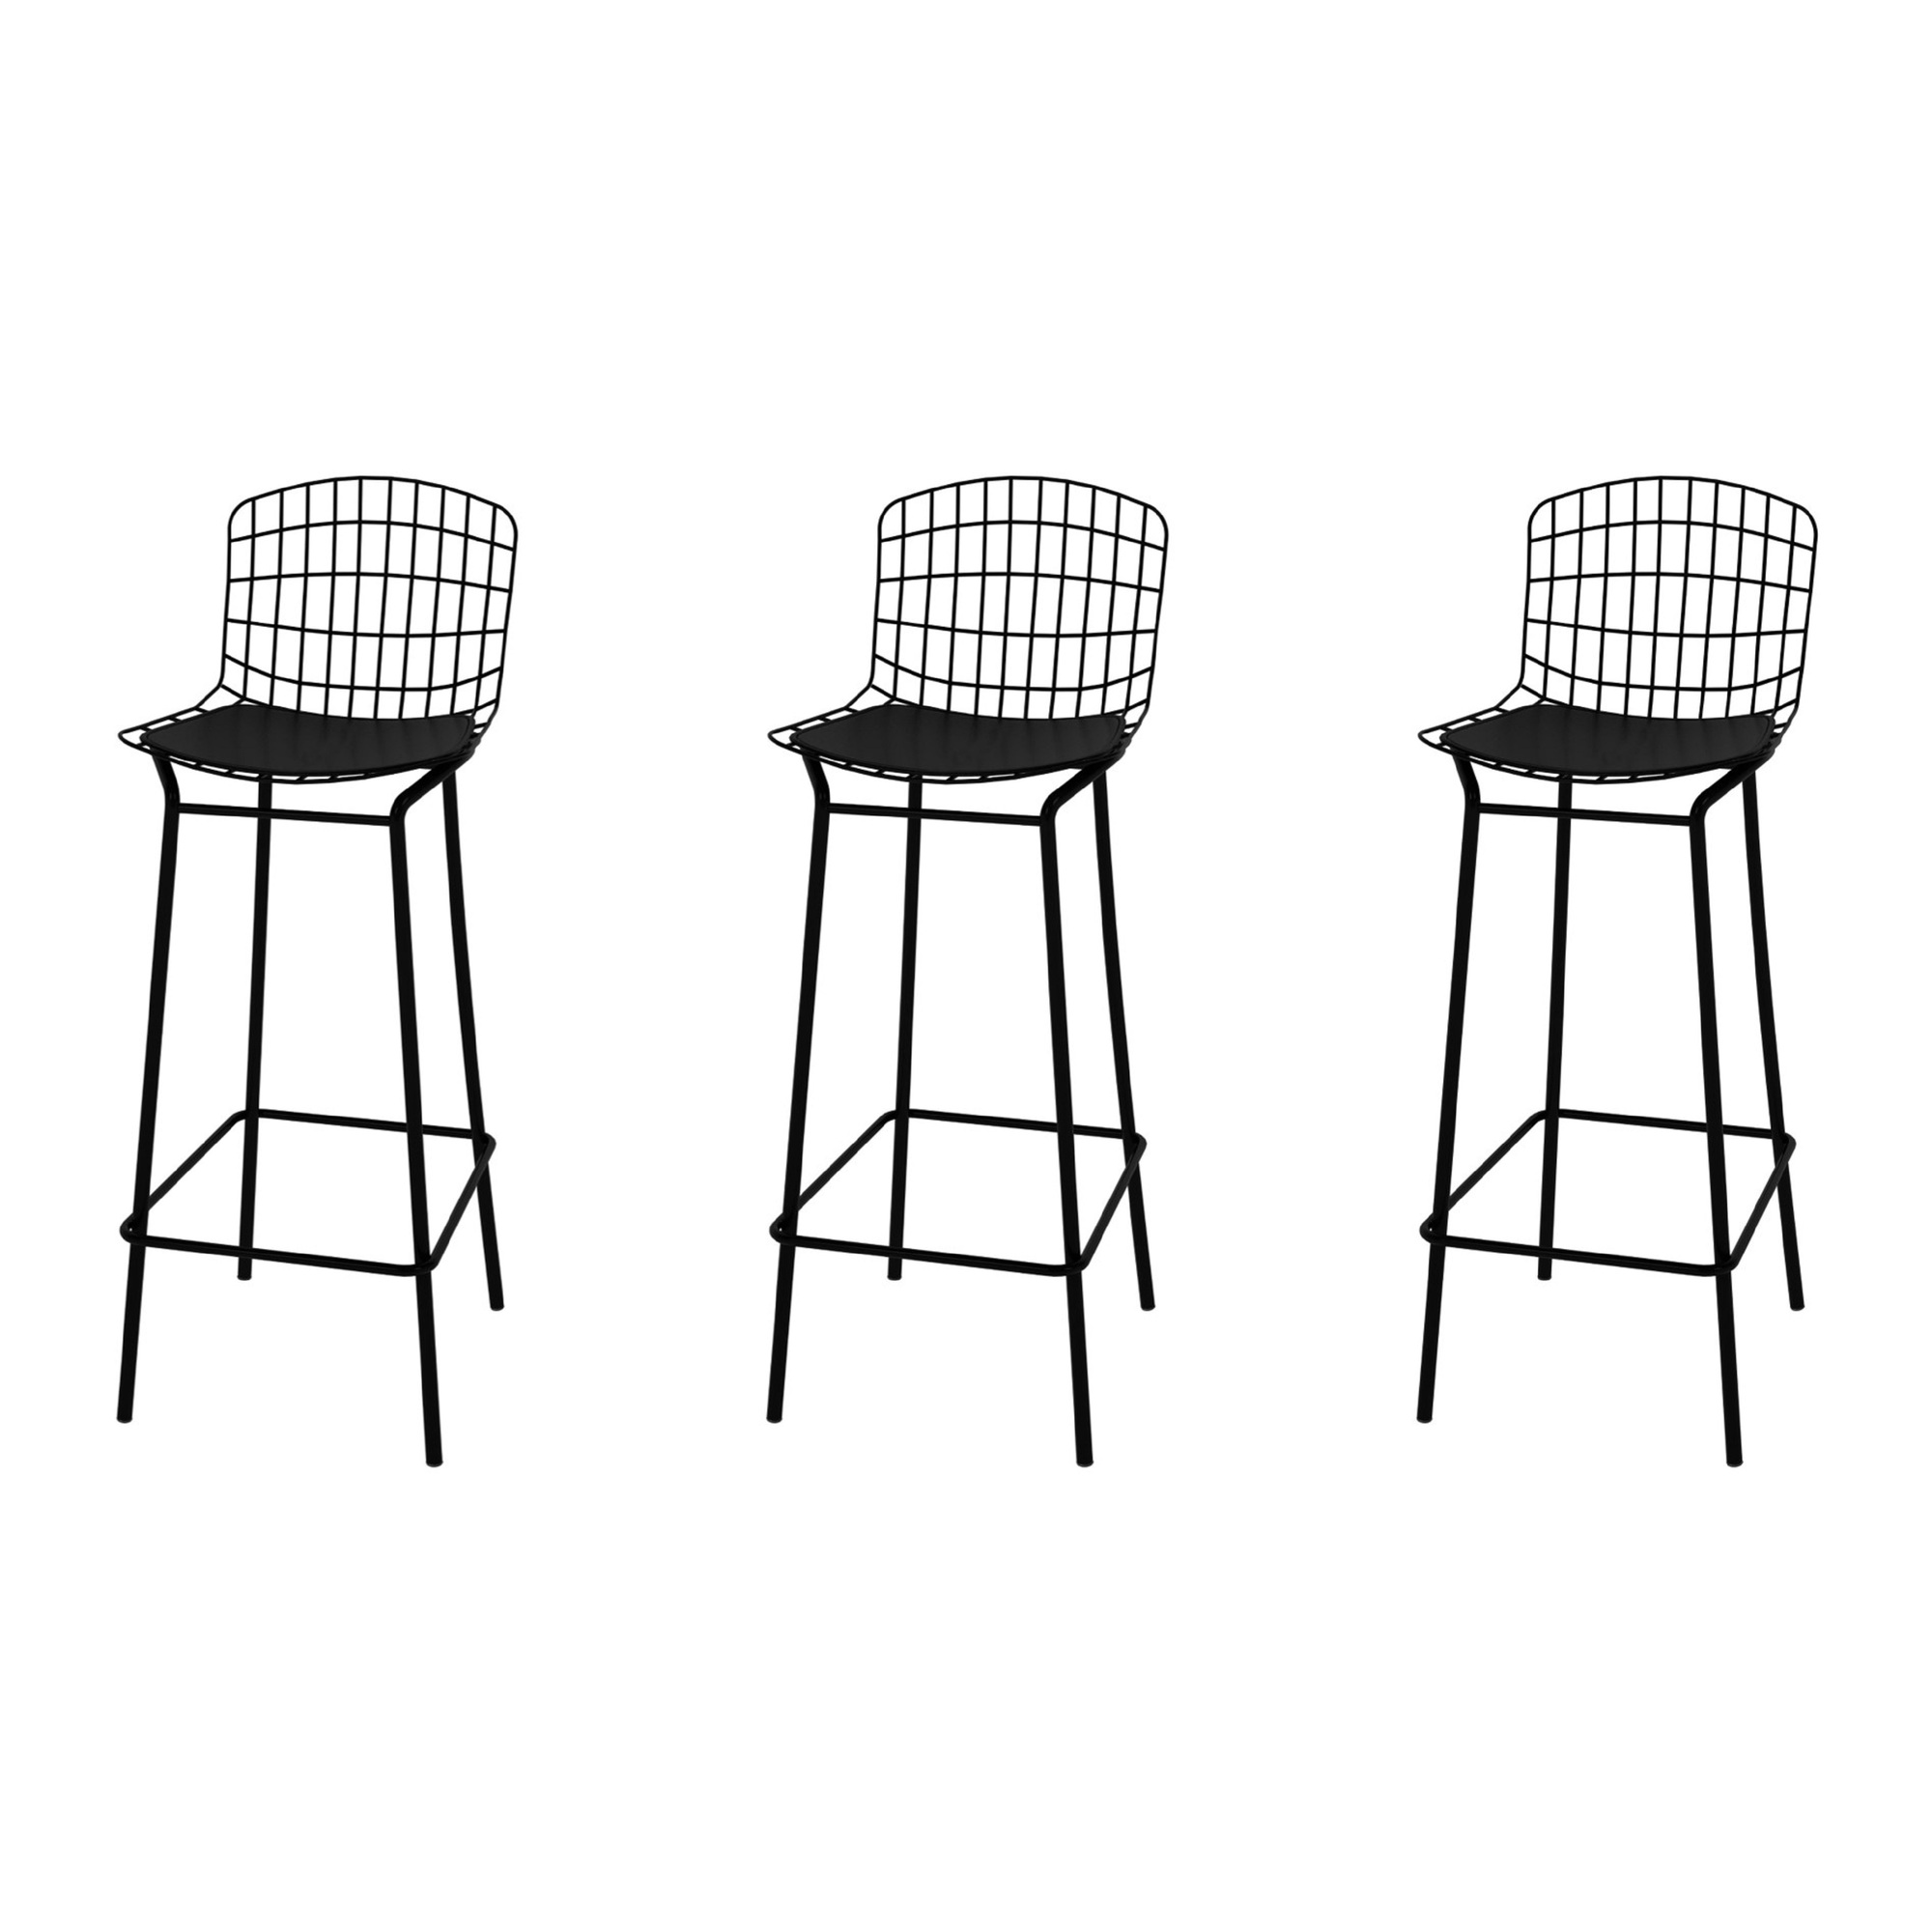 Manhattan Comfort, Madeline 41.73Inch Stool Set of 3 Seat Cushion Black, Primary Color Black, Included (qty.) 3 Model 3-198AMC